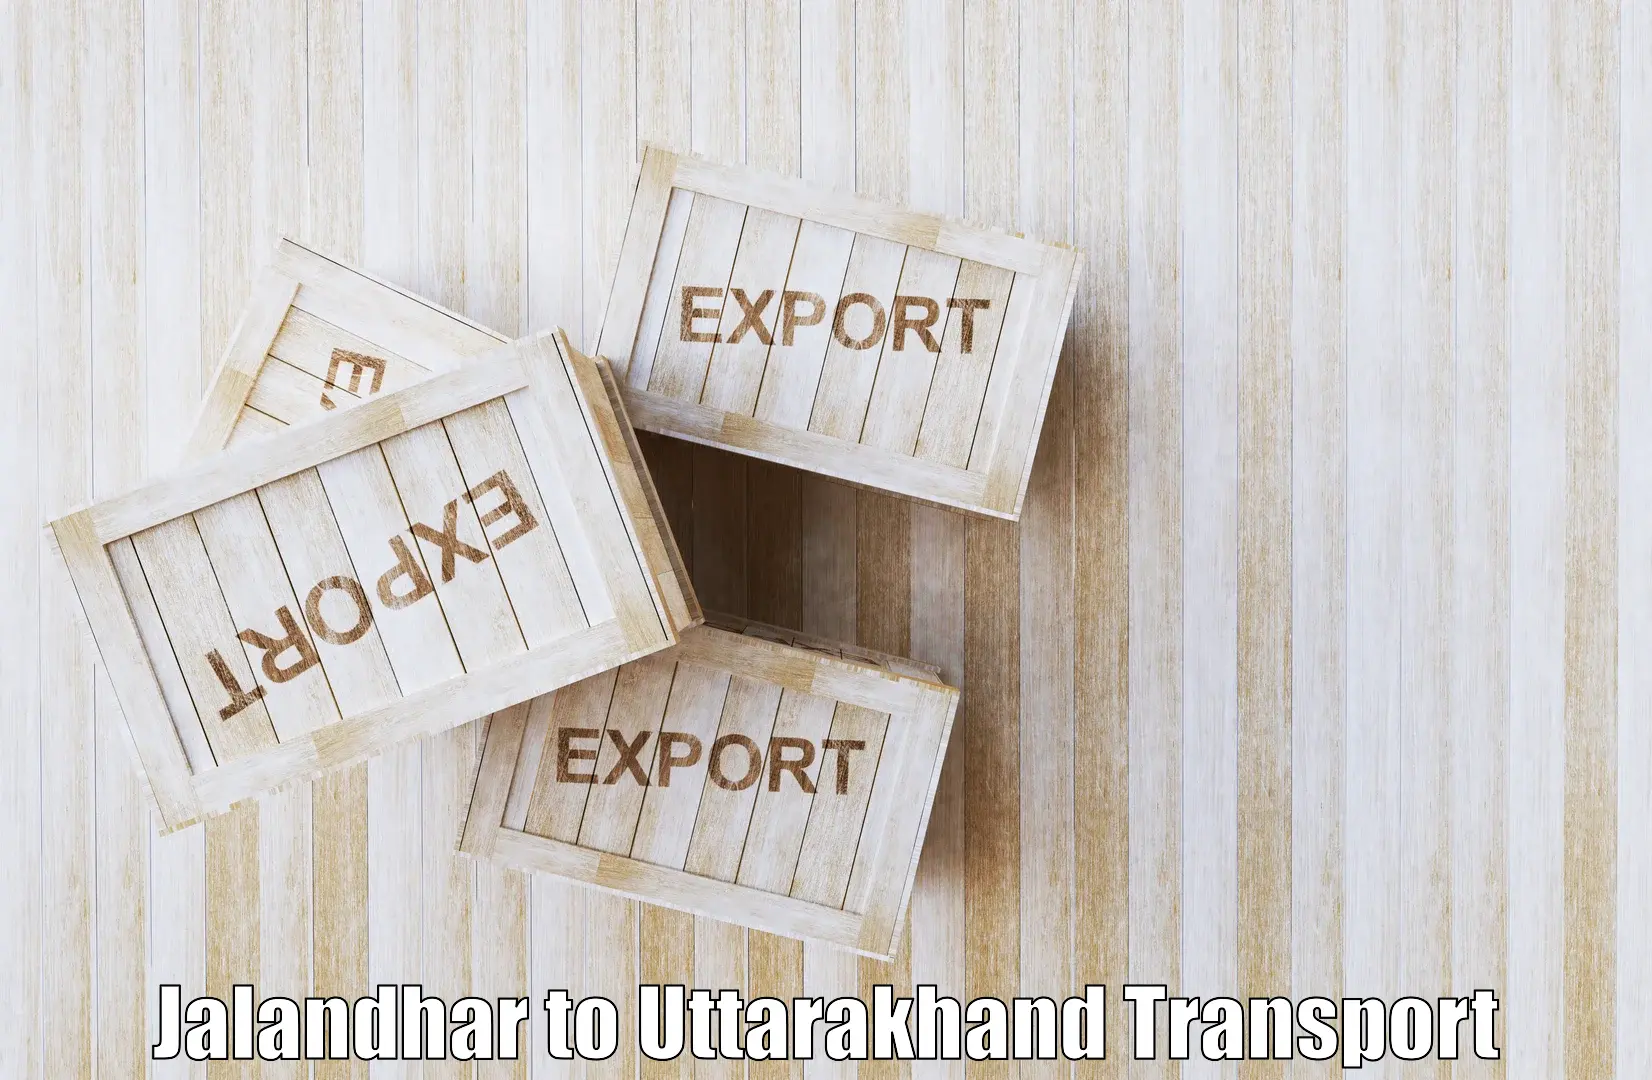 Container transport service Jalandhar to Nainital